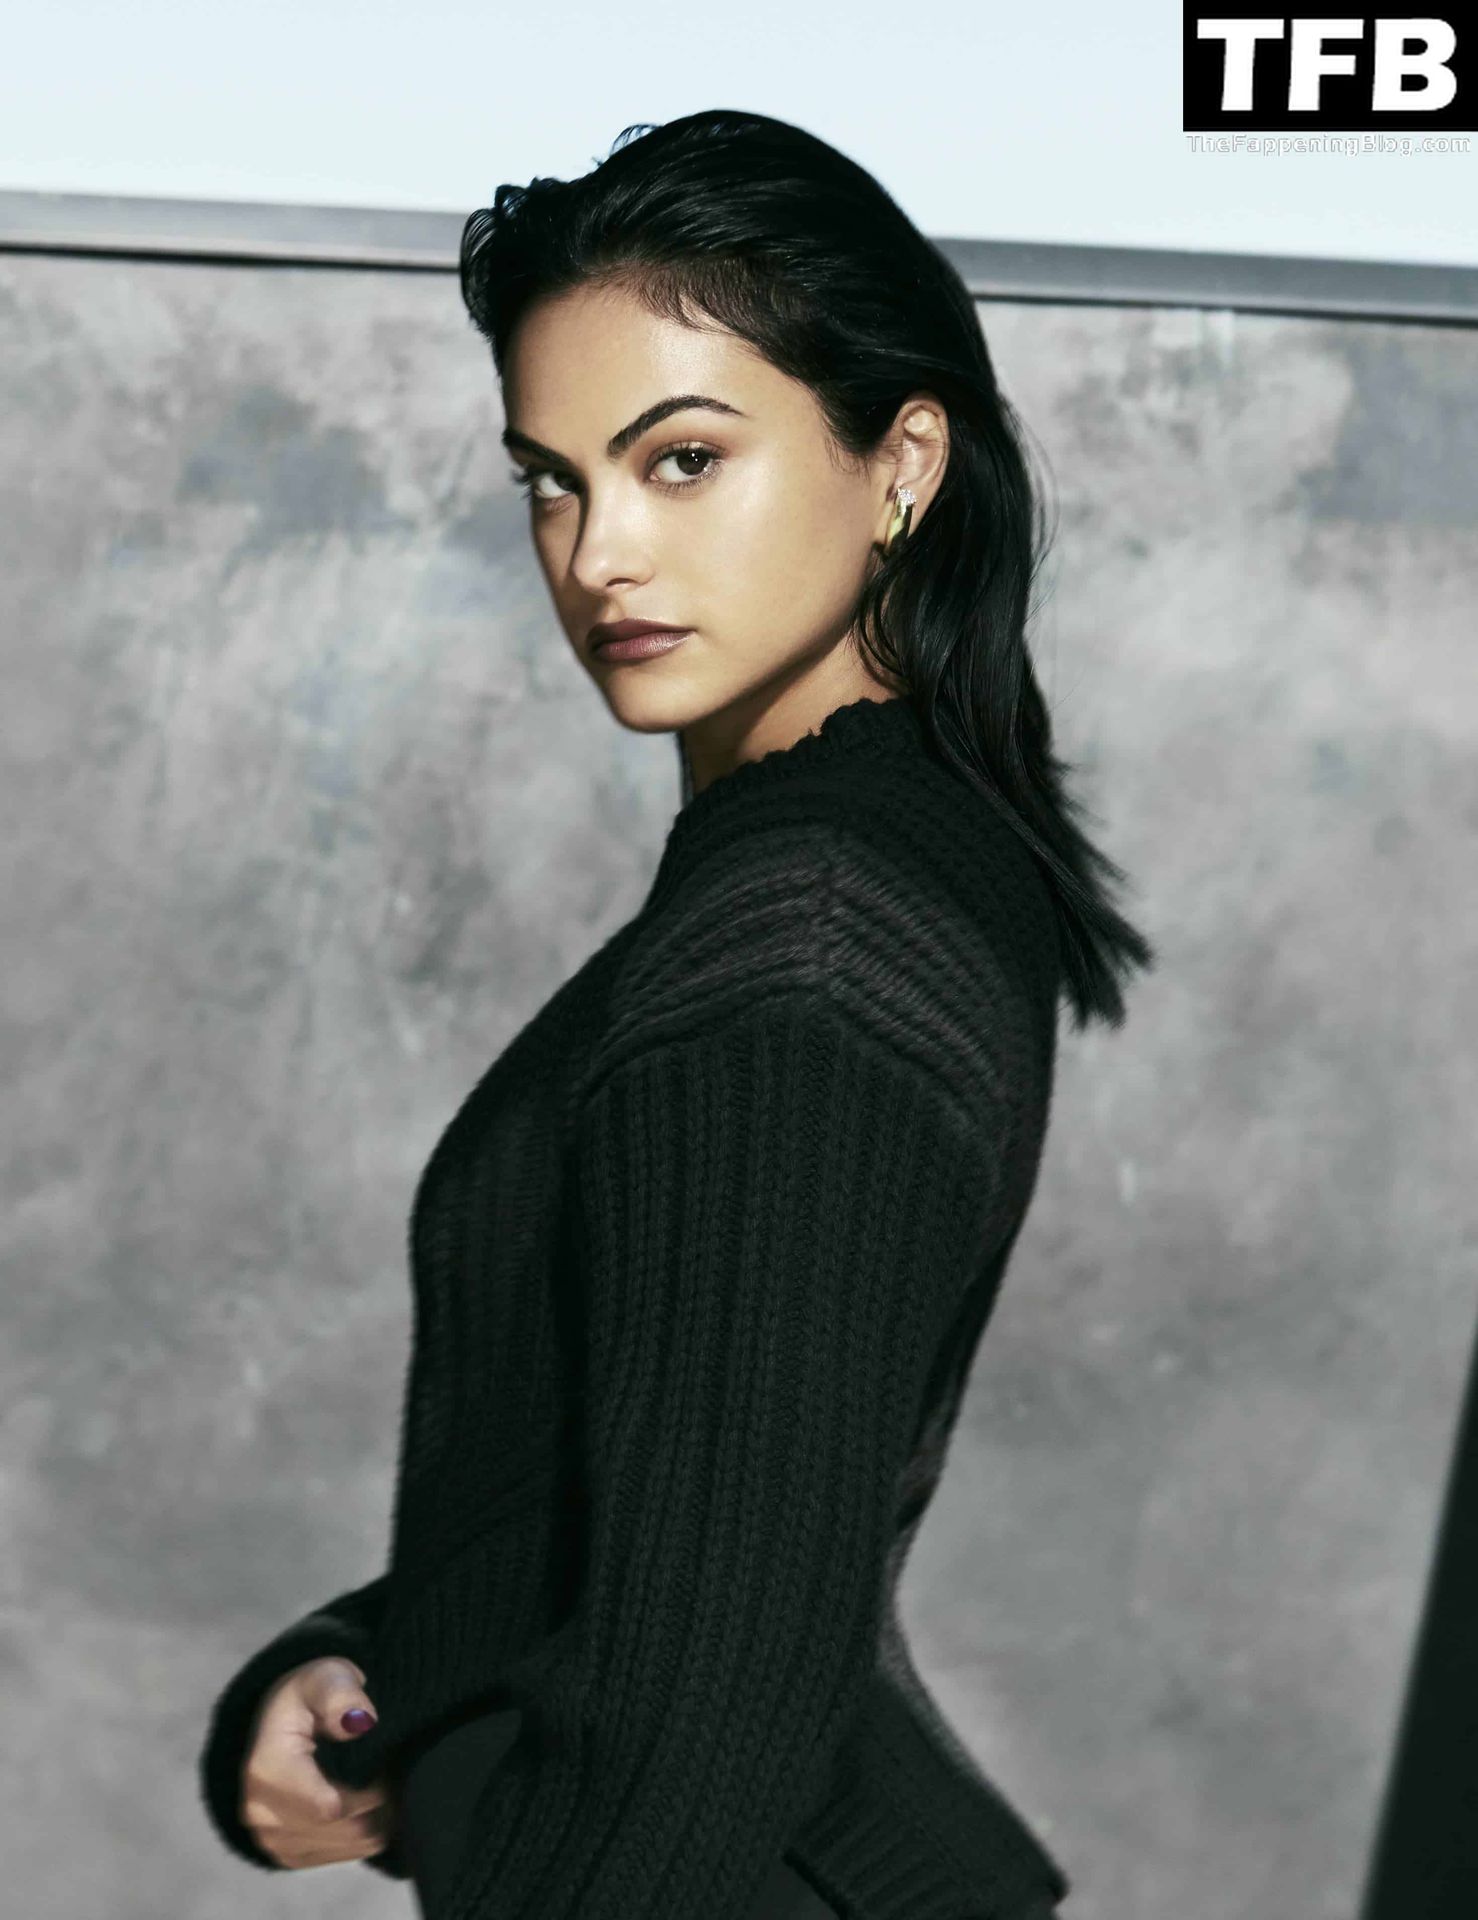 Camila-Mendes-Sexy-The-Fappening-Blog-11.jpg